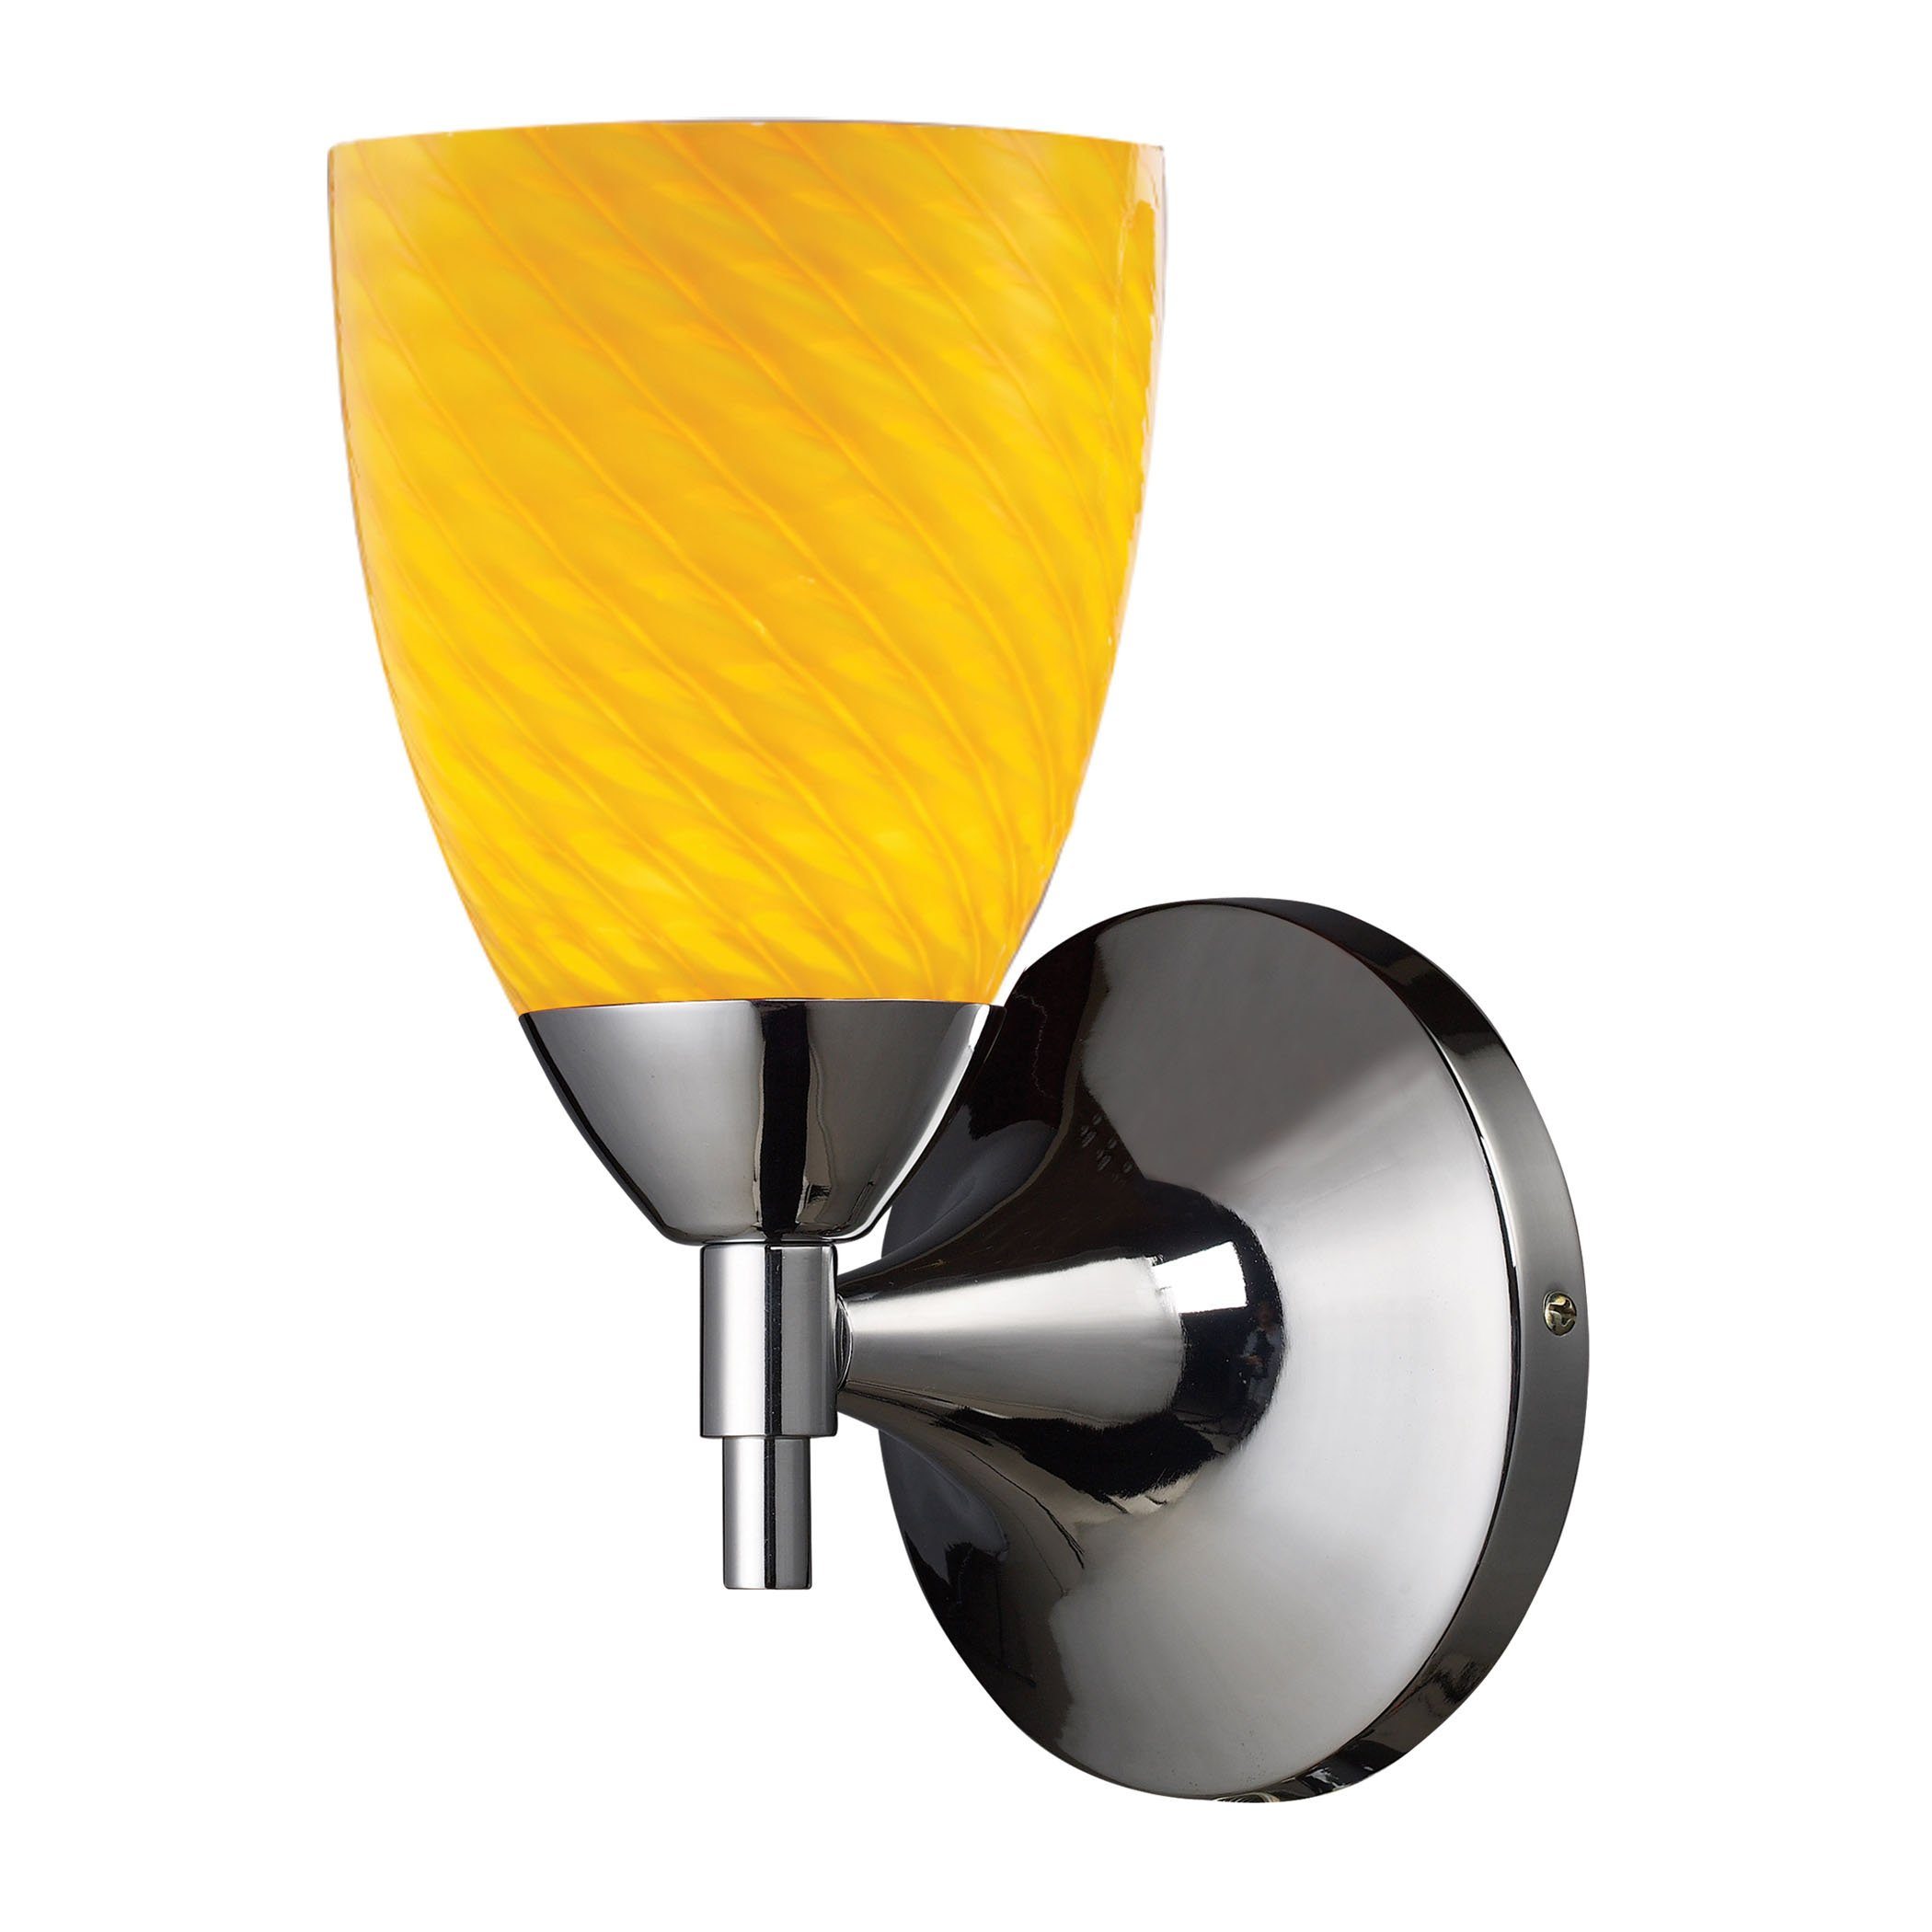 Celina 1 Light Sconce In Polished Chrome And Canary Glass Wall Sconce Elk Lighting 